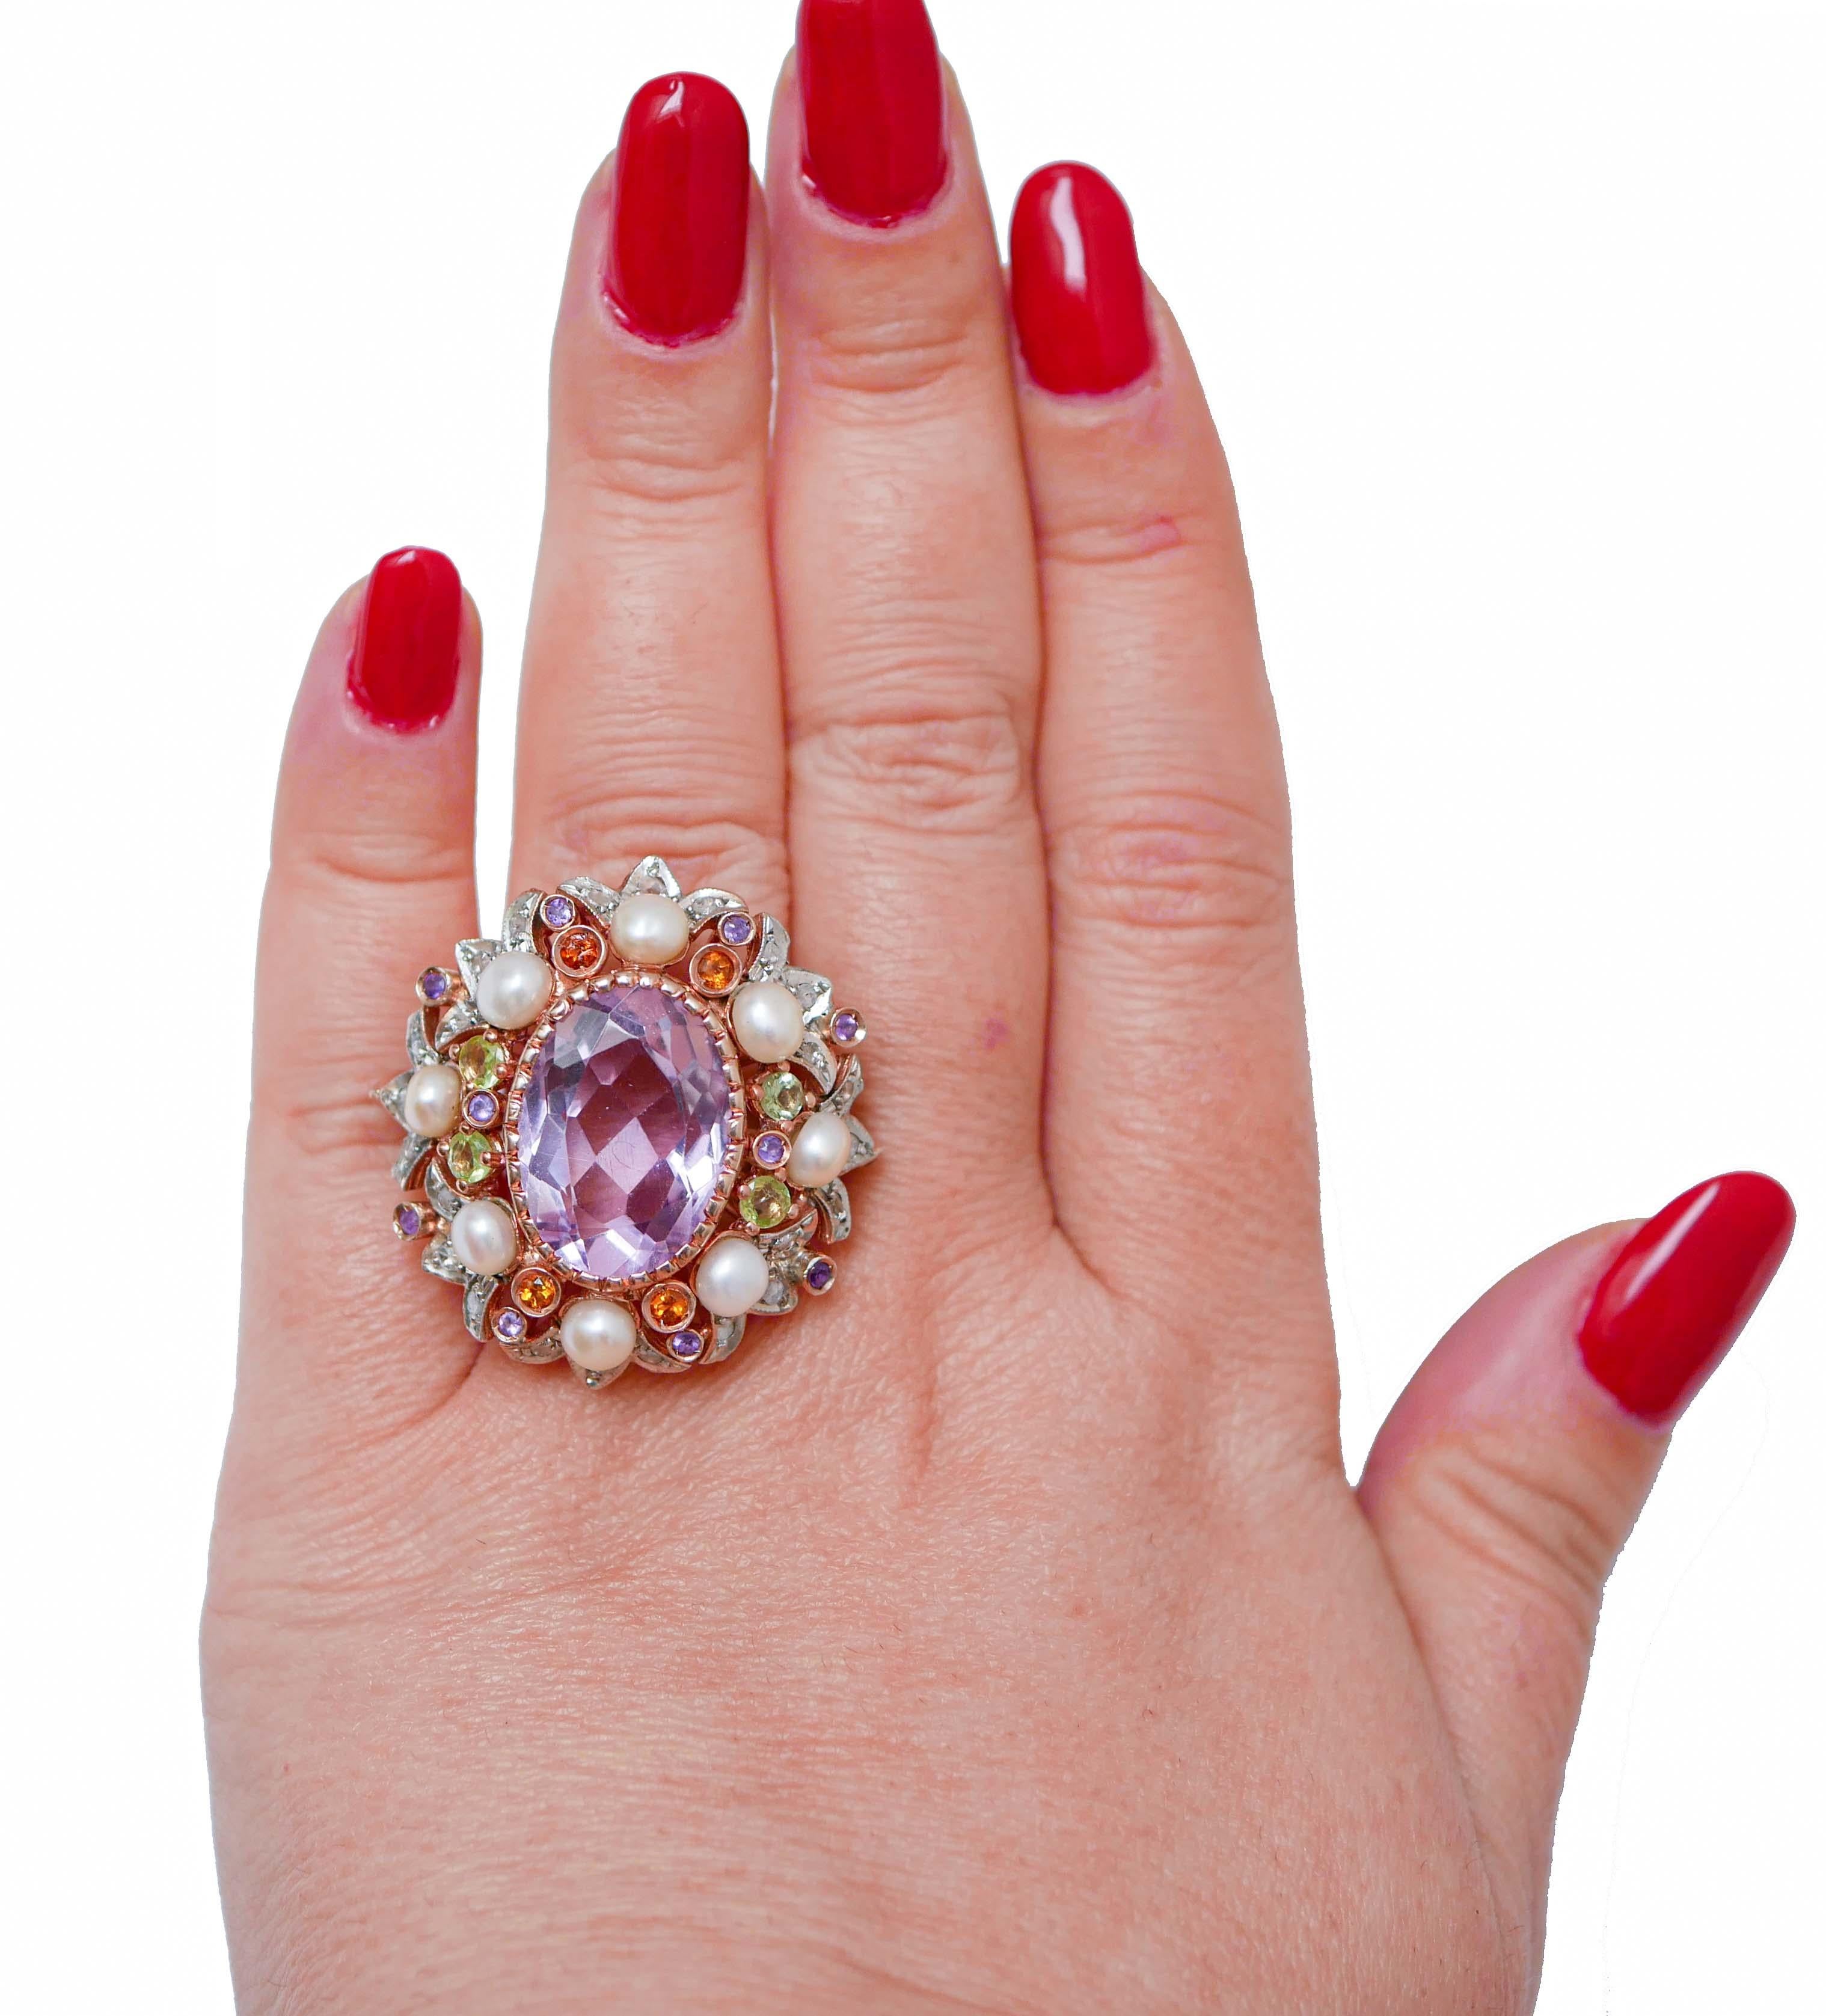 Mixed Cut Amethysts, Peridots, Topazs, Diamonds, Pearls, 14 Kt Rose Gold and Silver Ring. For Sale